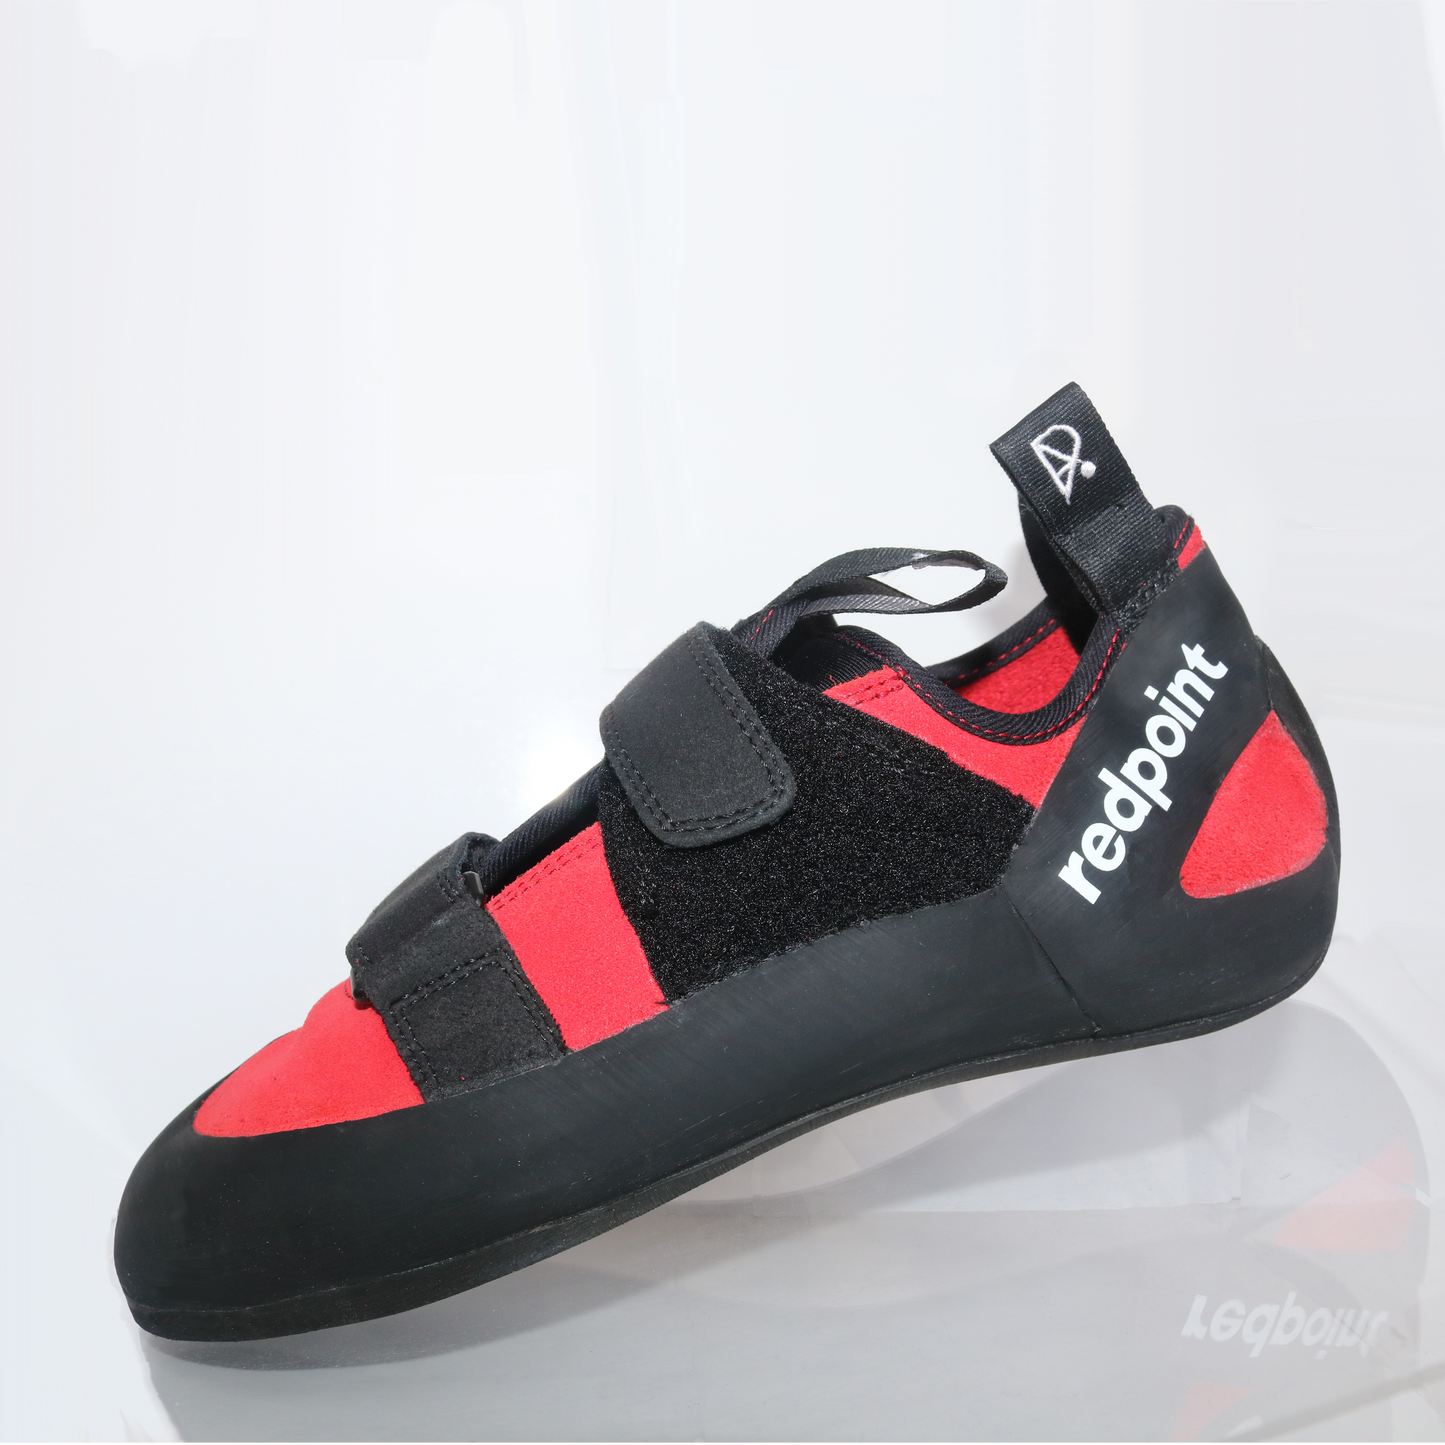 Redpoint climbing shoes Redpoint Ascend